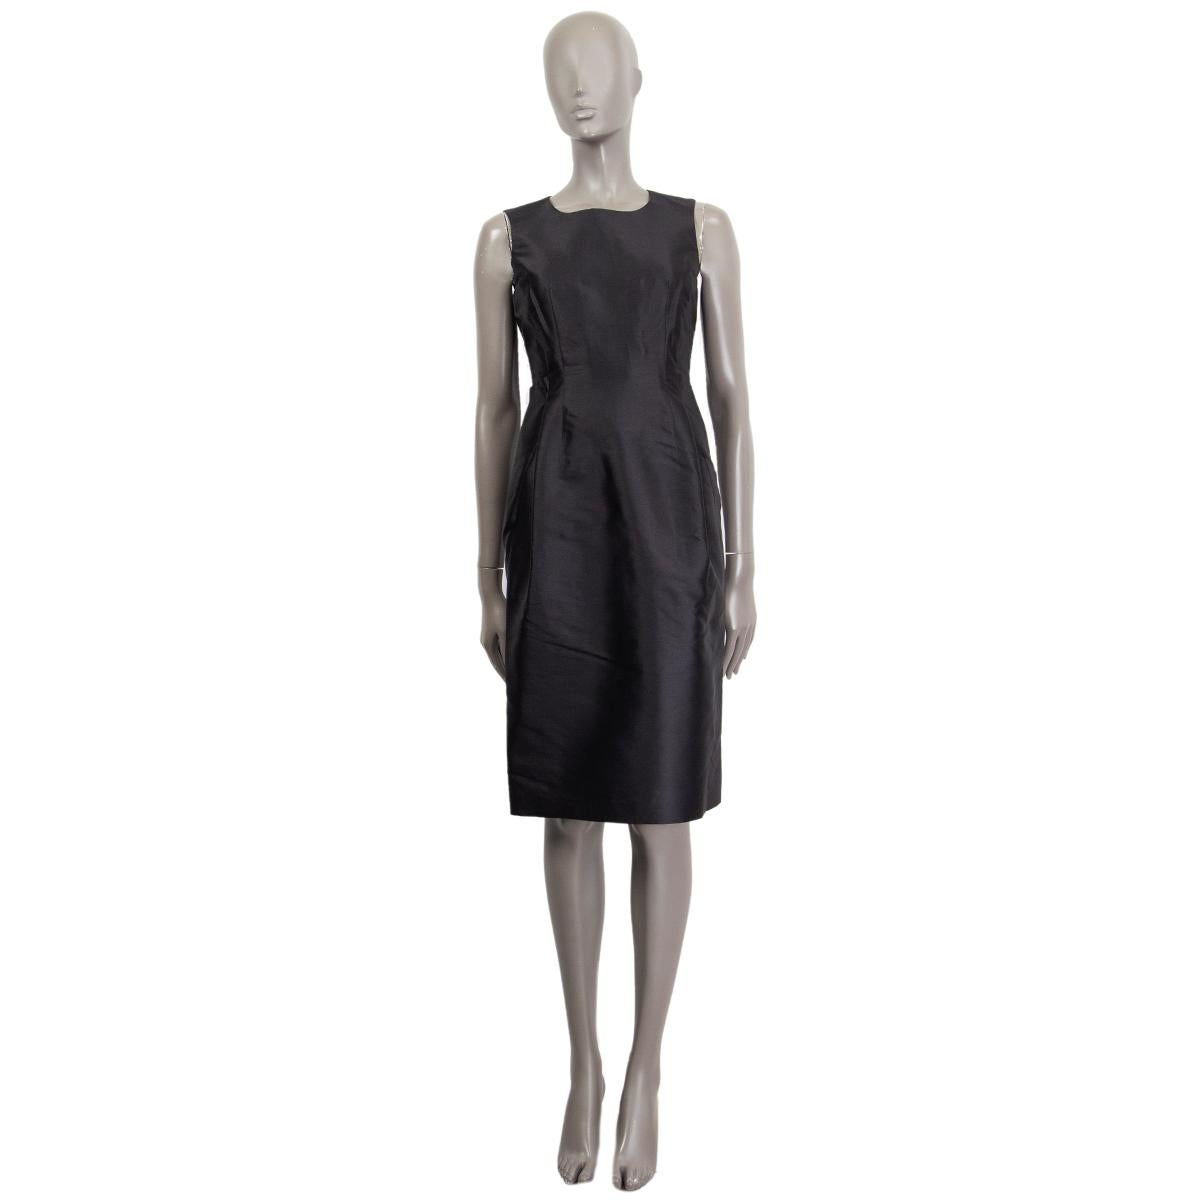 100% authentic Jil Sander sleeveless sheath dress in black silk (100%) with two pleats at front. Lined in black silk (100%). Opesn with a zipper on the back. Has been worn once and is in virtually new condition. 

Measurements
Tag